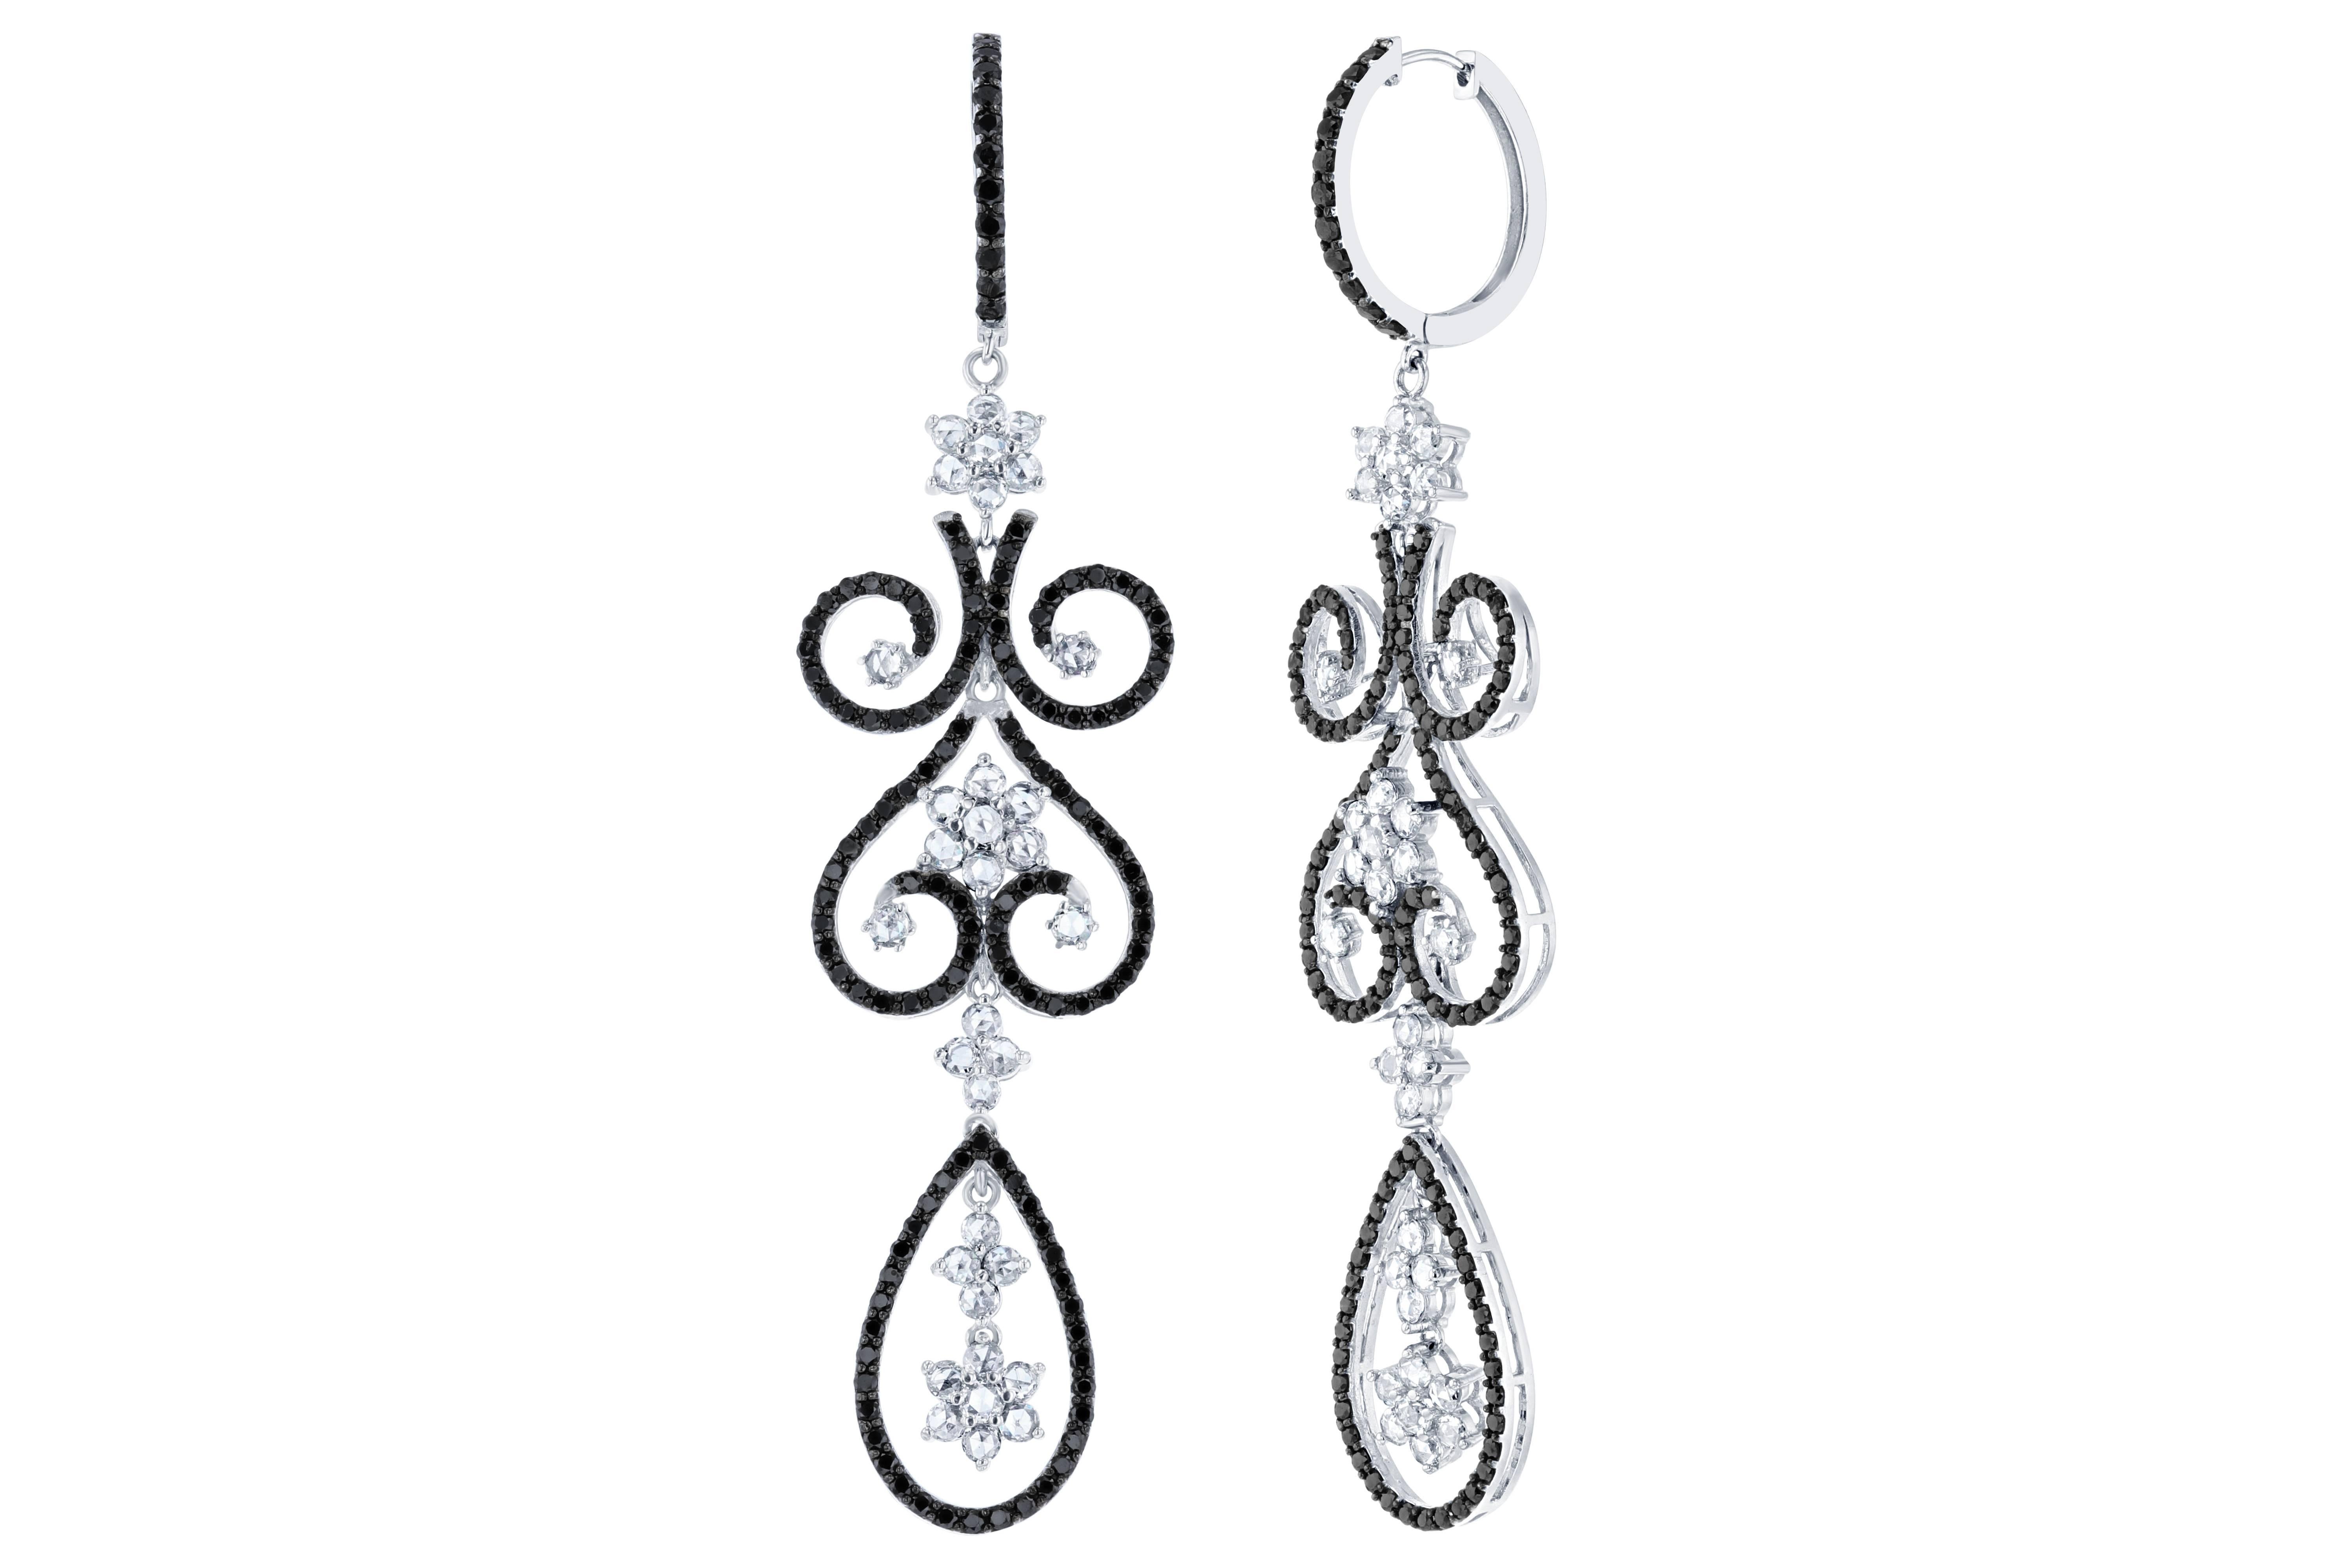 Beautiful Black Diamond and White Rose-Cut Diamond Chandelier Earrings.  This intricate design has 66 Rose Cut Diamonds that weigh 3.98 carats (Clarity: VS2, Color: F) and 270 Black Diamonds that weigh 3.82 carats.  The length of the earrings is